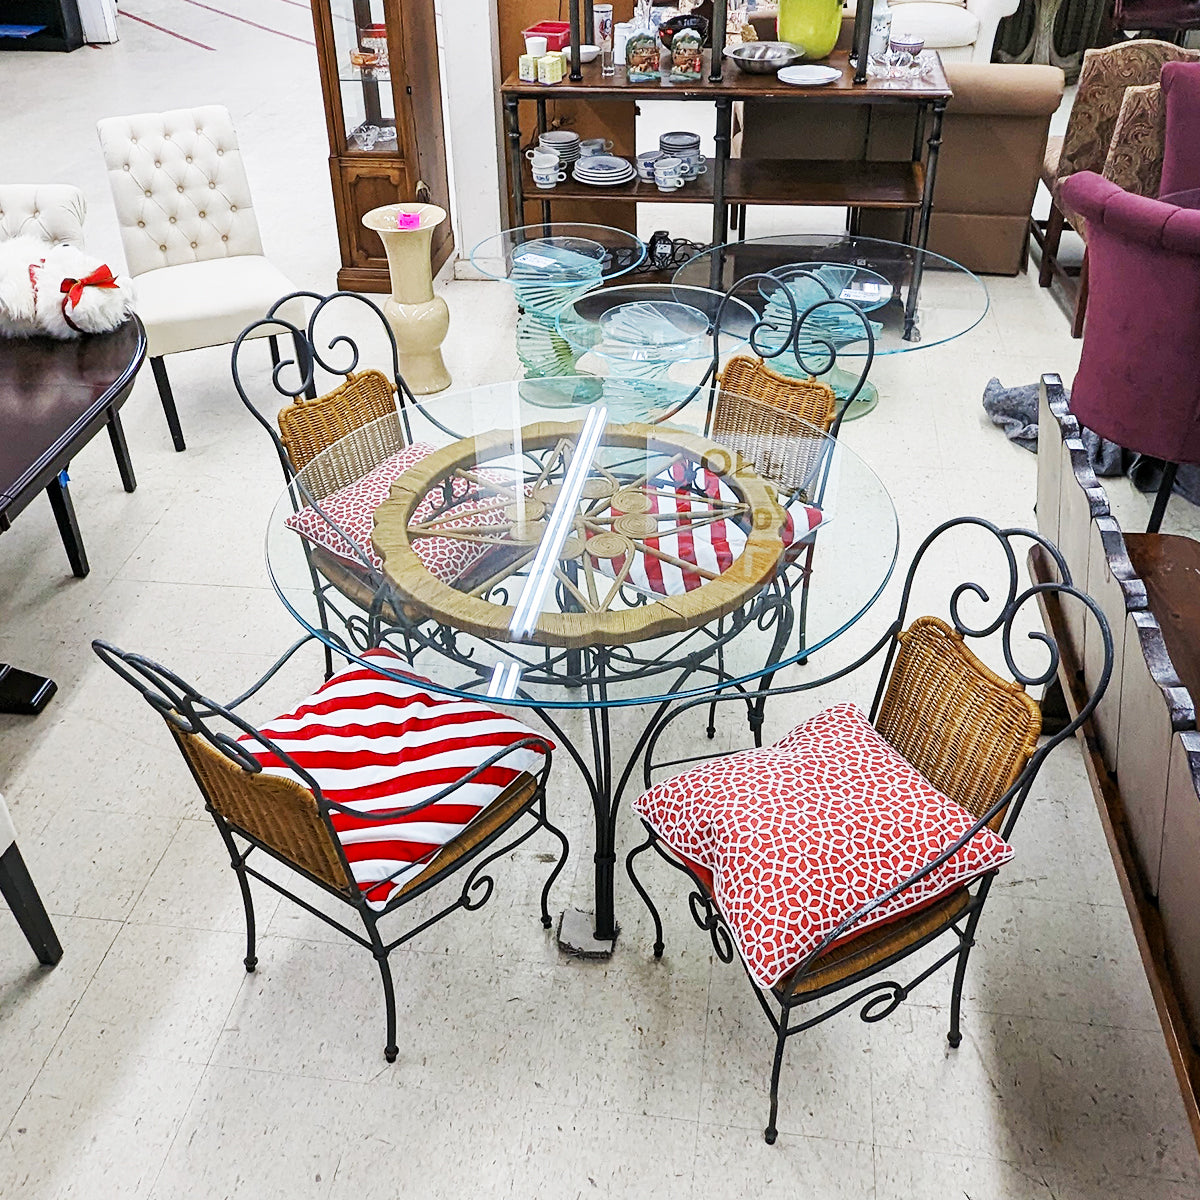 Bevel Glass Wrought Iron Bistro Table + 4 Chairs w/Red Accent Pillows - Habroc - Online ReStore